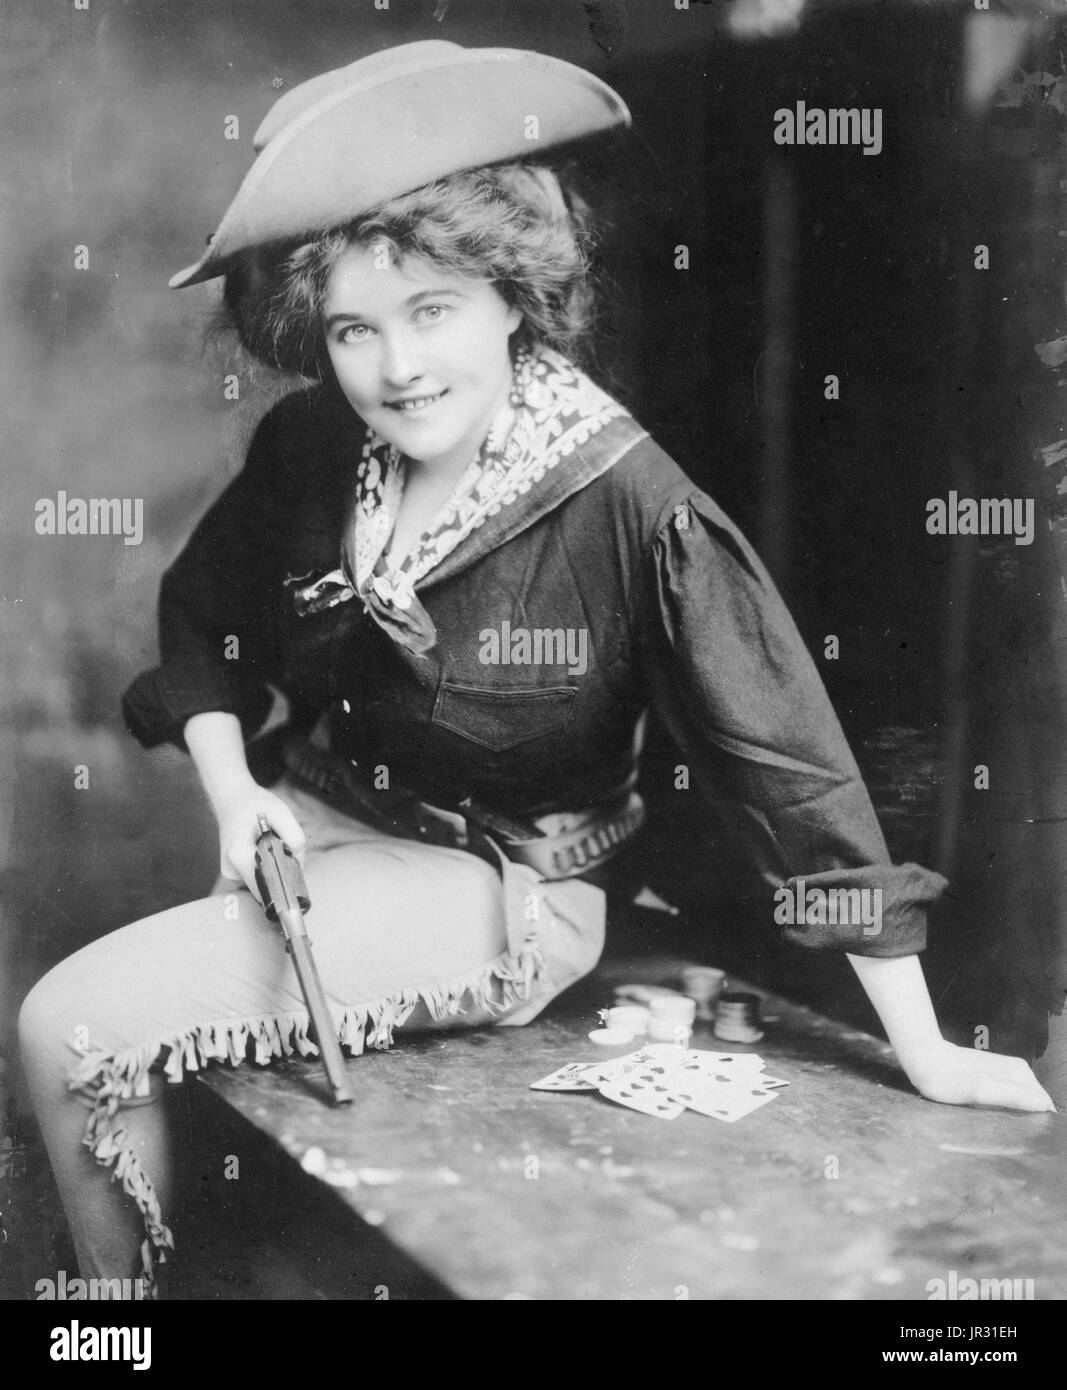 Woman posing in cowgirl outfit, holding revolver, seated on table, with playing cards. The history of women in the west, and women who worked on cattle ranches in particular, is not as well documented as that of men. It wasn't until the advent of Wild West Shows that 'cowgirls' came into their own. These adult women were skilled performers, demonstrating riding, expert marksmanship, and trick roping that entertained audiences around the world. Women such as Annie Oakley became household names. By 1900, skirts split for riding astride became popular, and allowed women to compete with the men wi Stock Photo